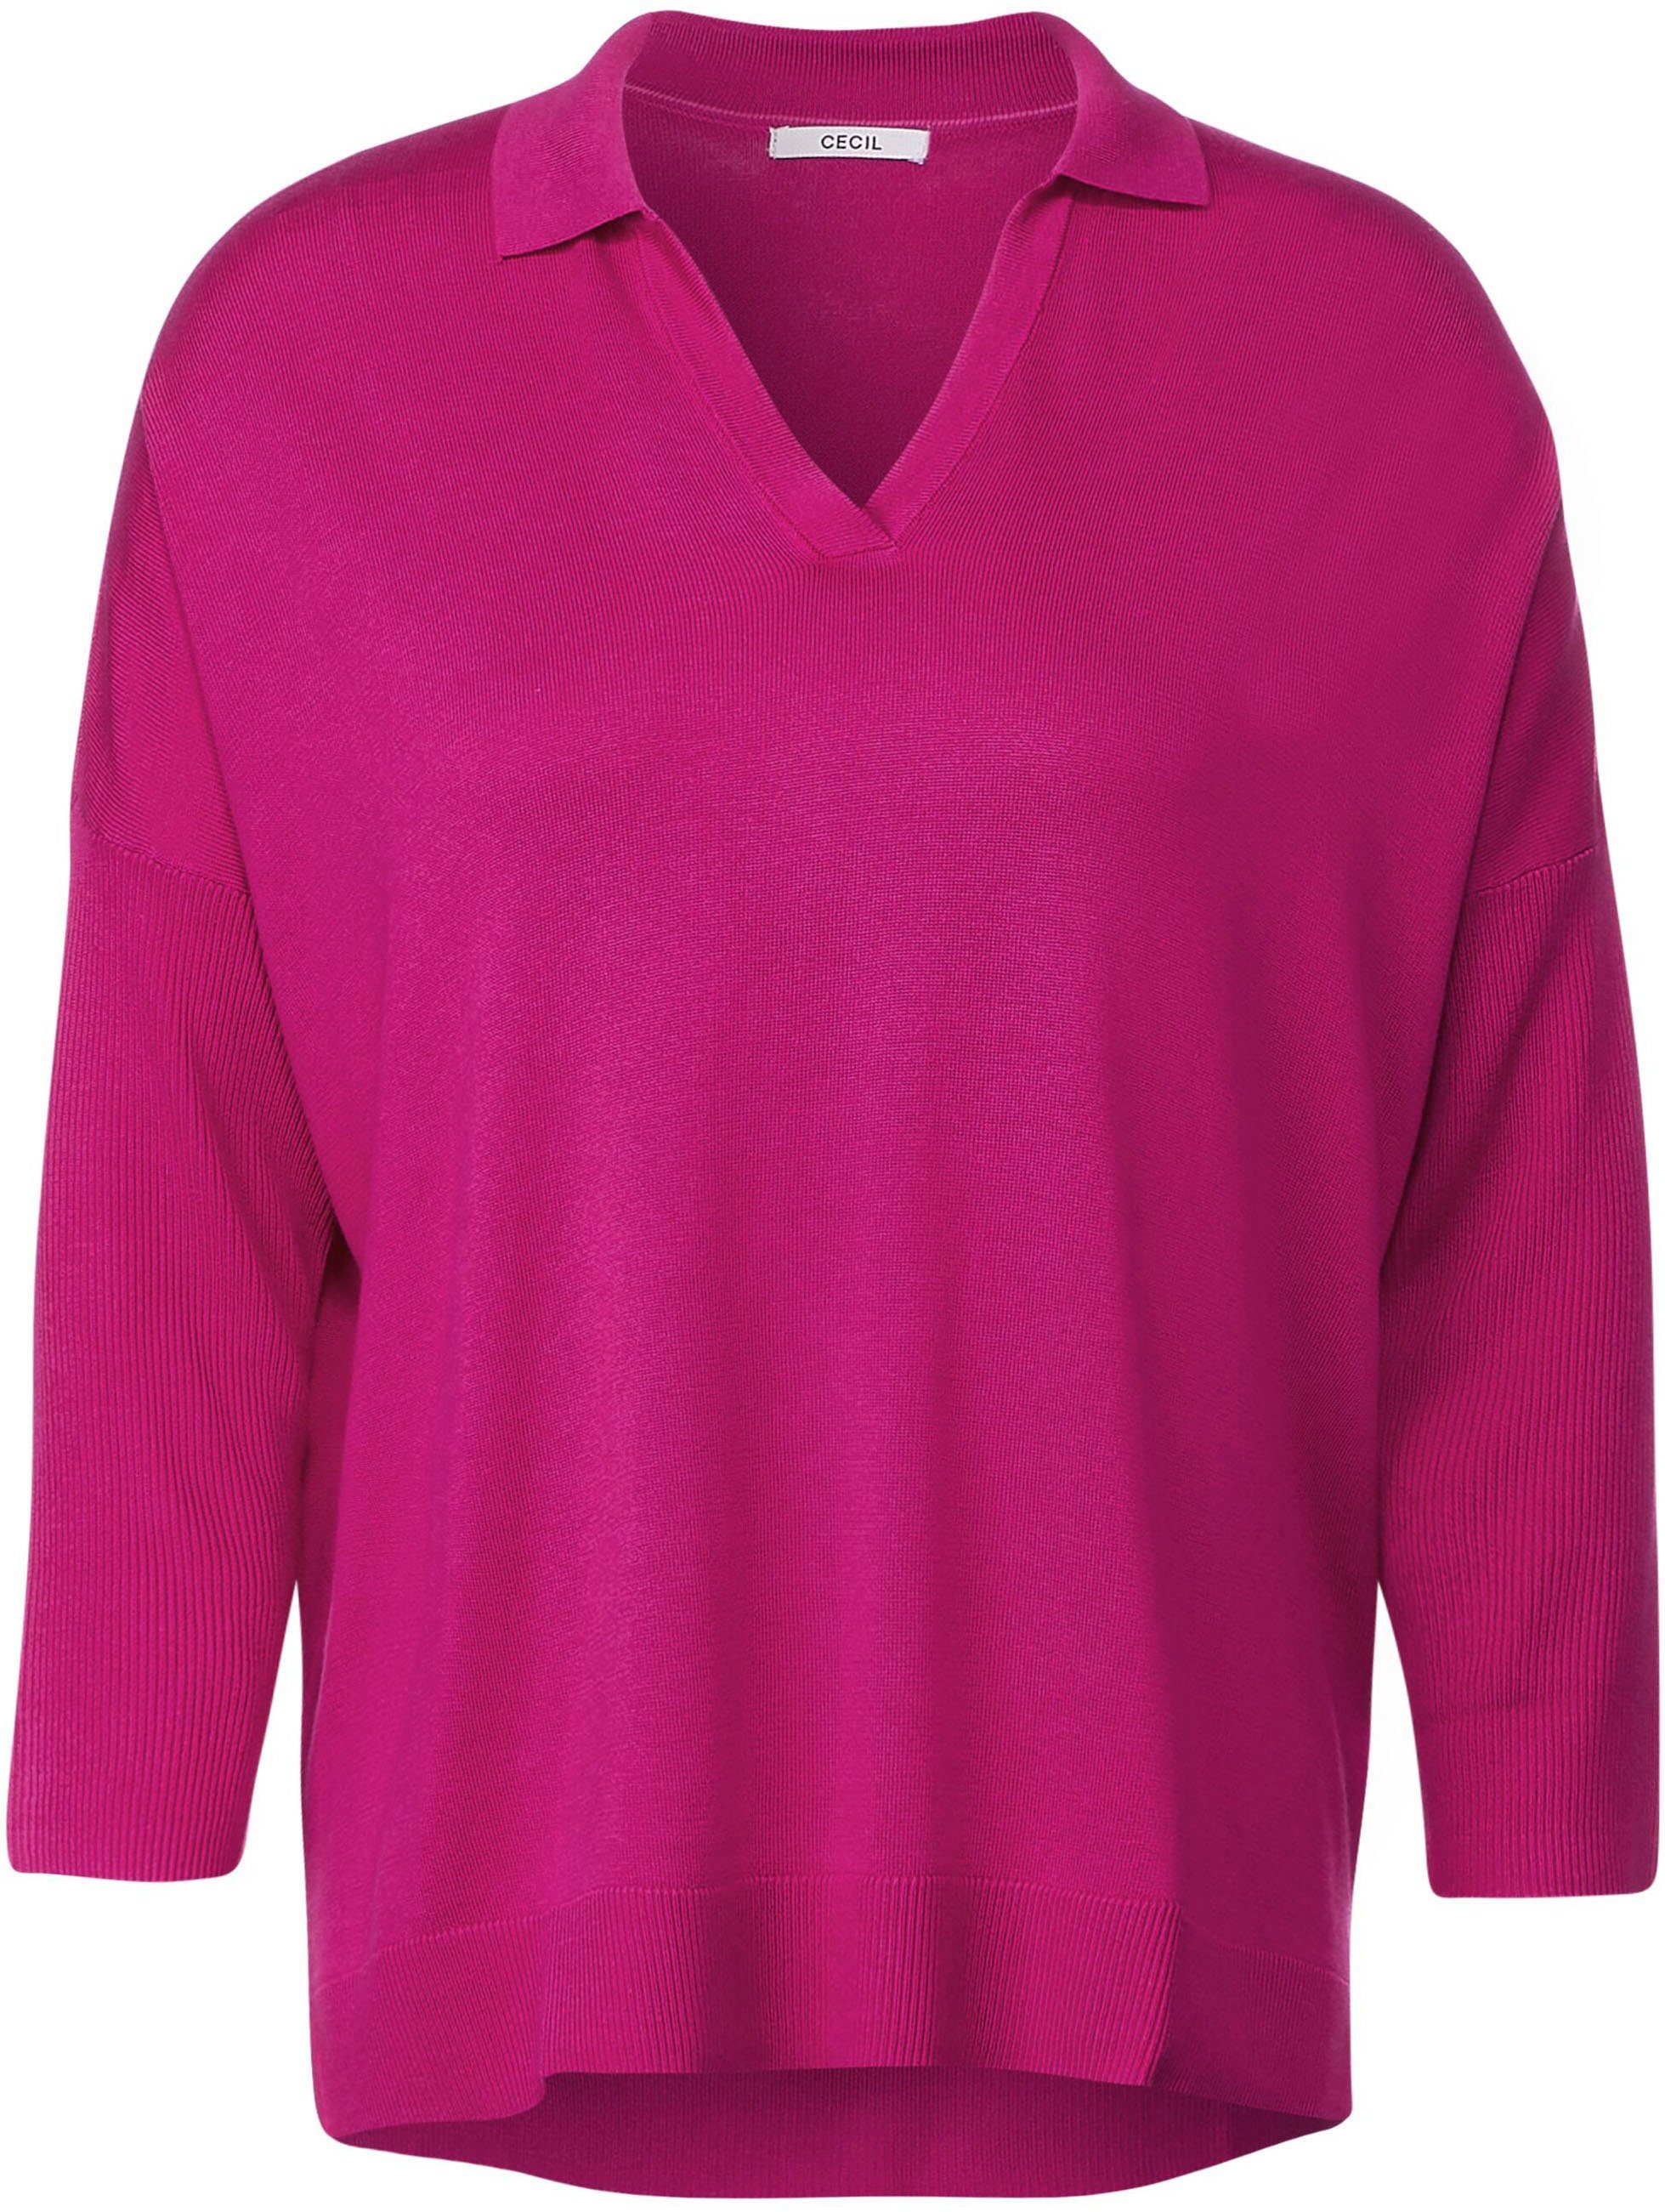 in pink Cecil cool Polokragenpullover Unifarbe